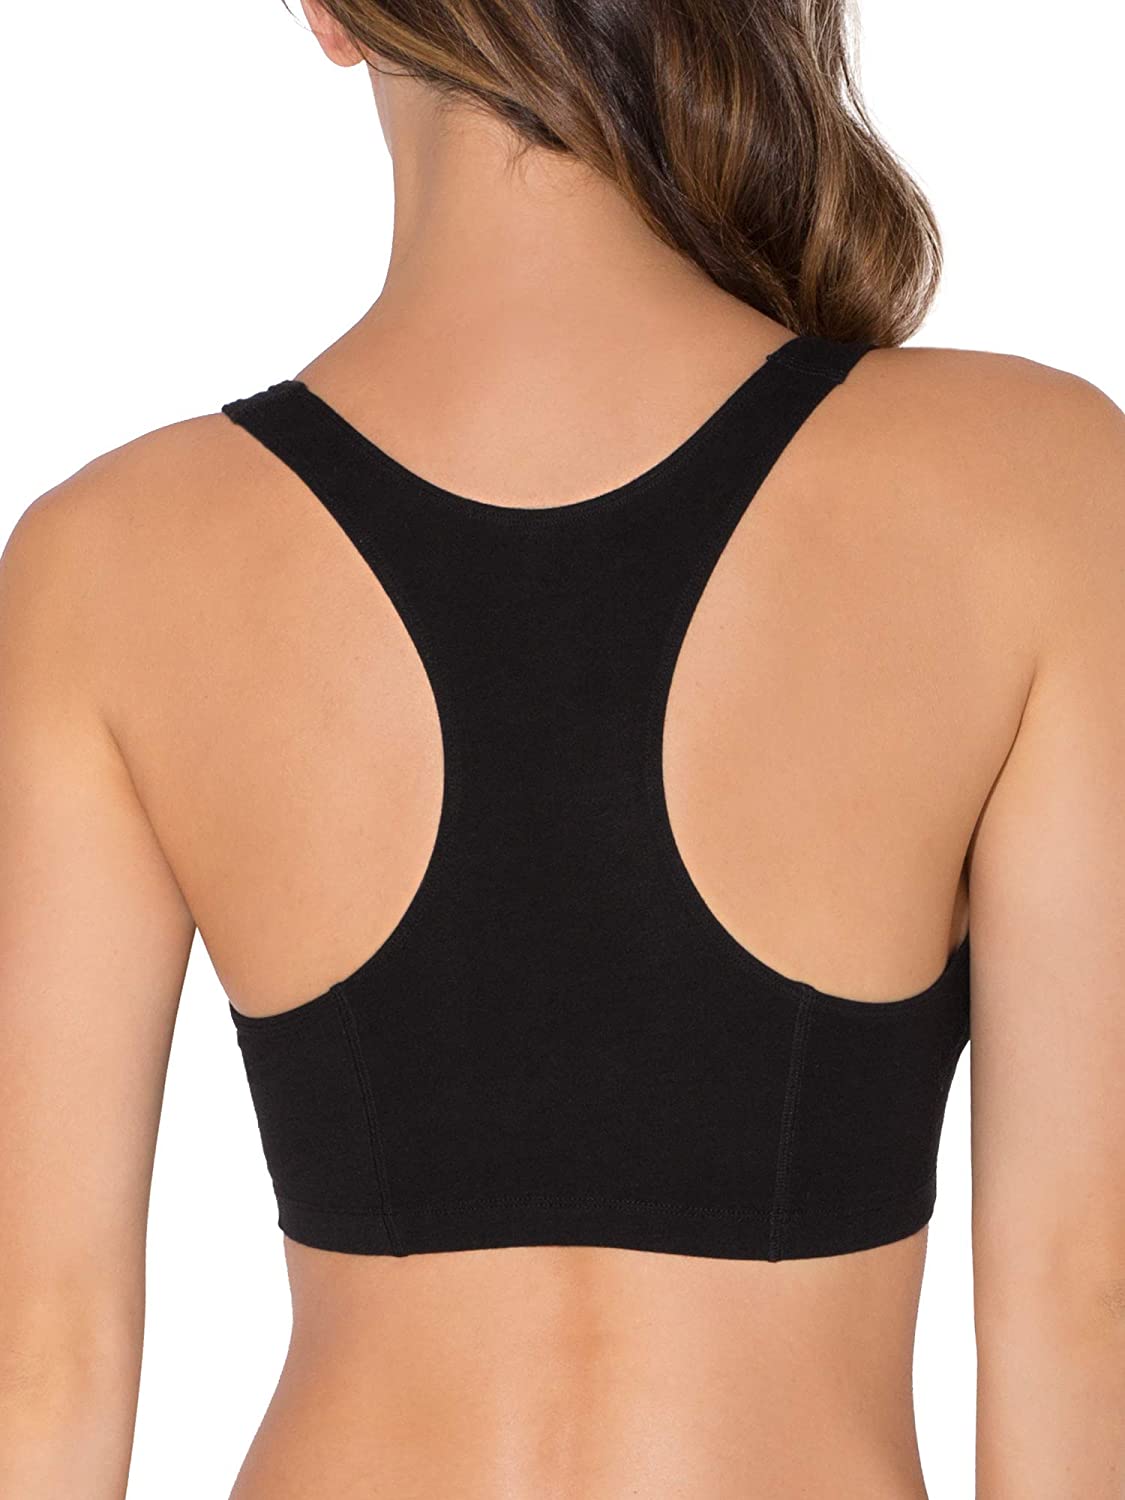 Fruit of the Loom Women's Built-Up Sports Bra (Pack of 3)